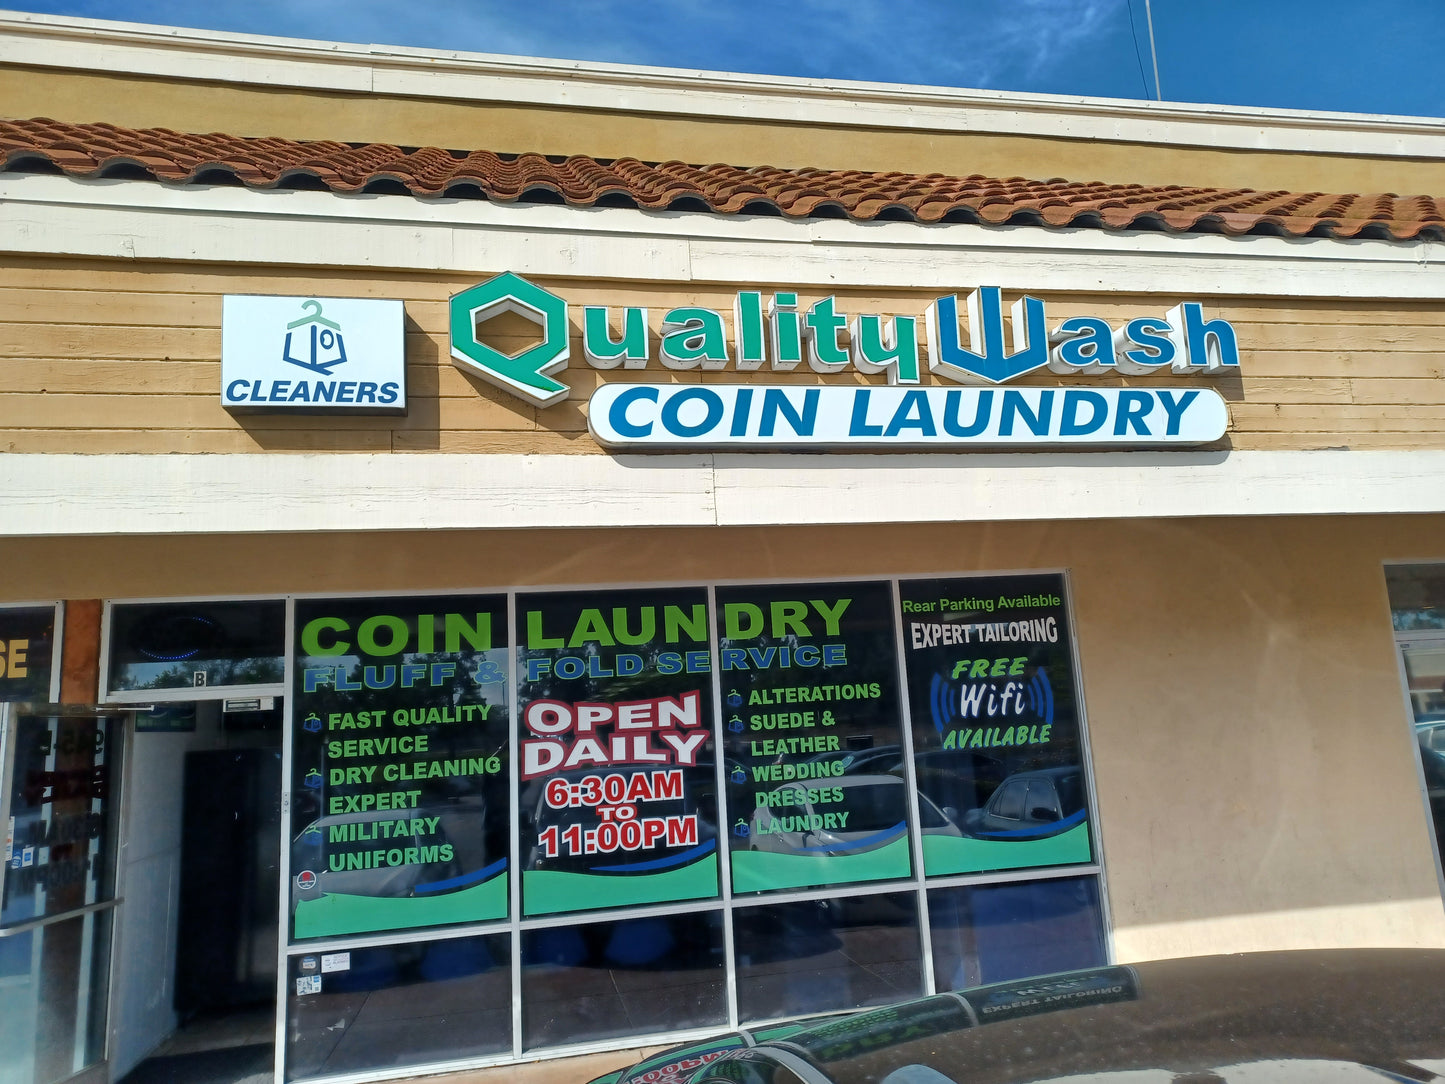 Fluff and Fold Services at Otay Lakes Road